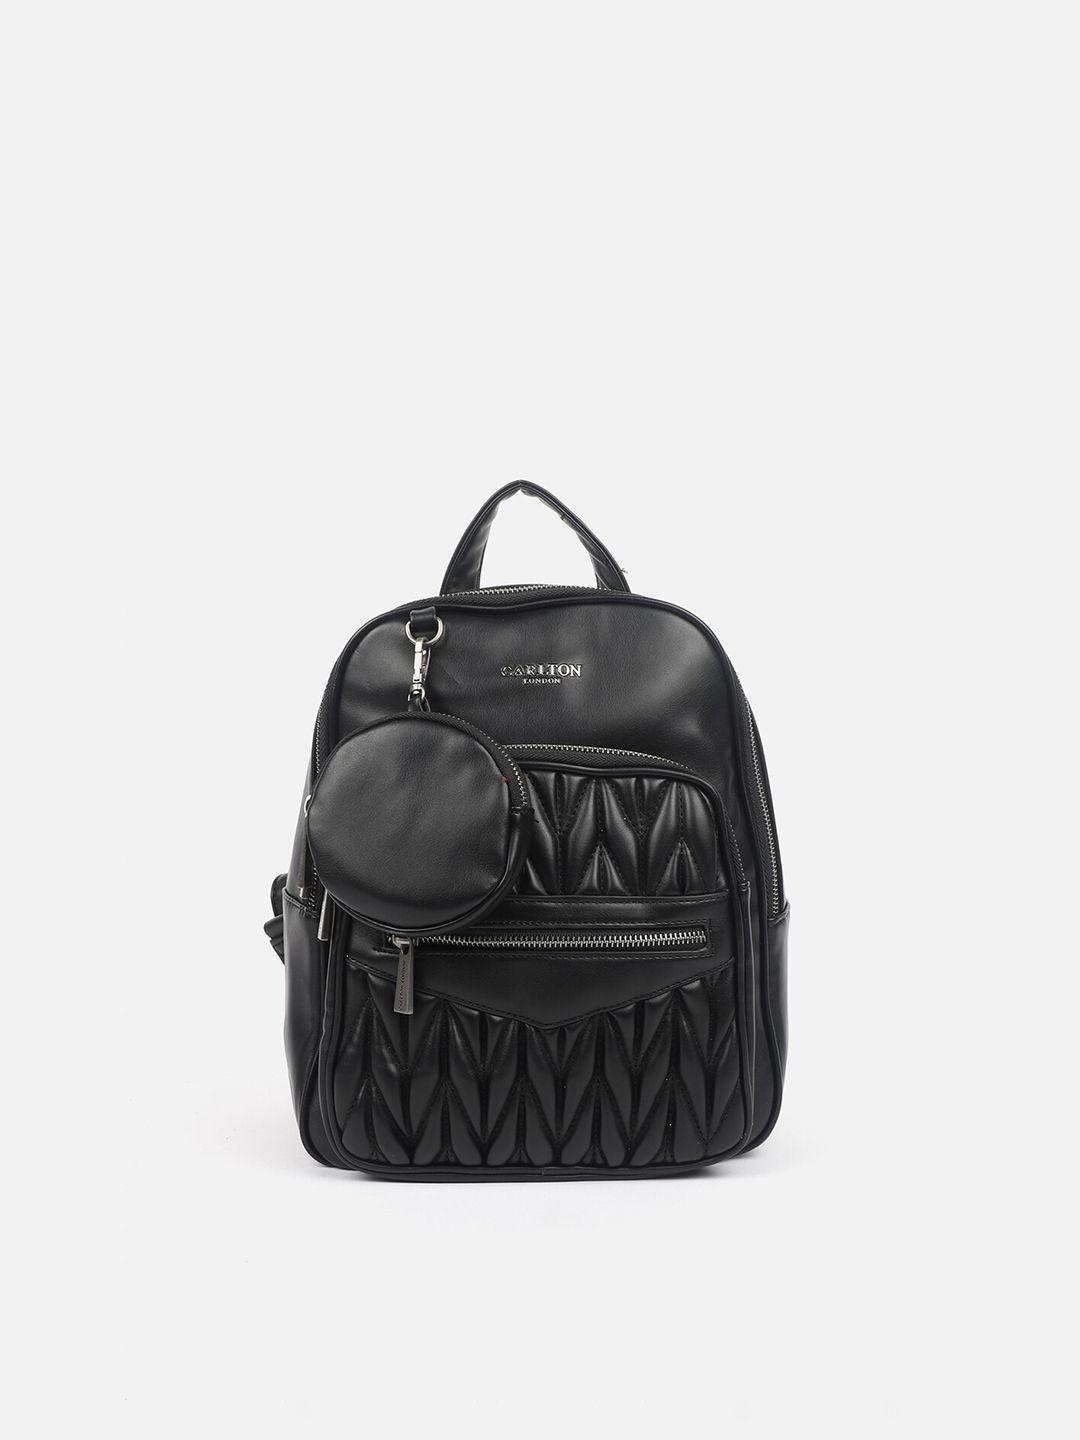 Carlton London Backpack with Quilted Details & Comes with Pouch